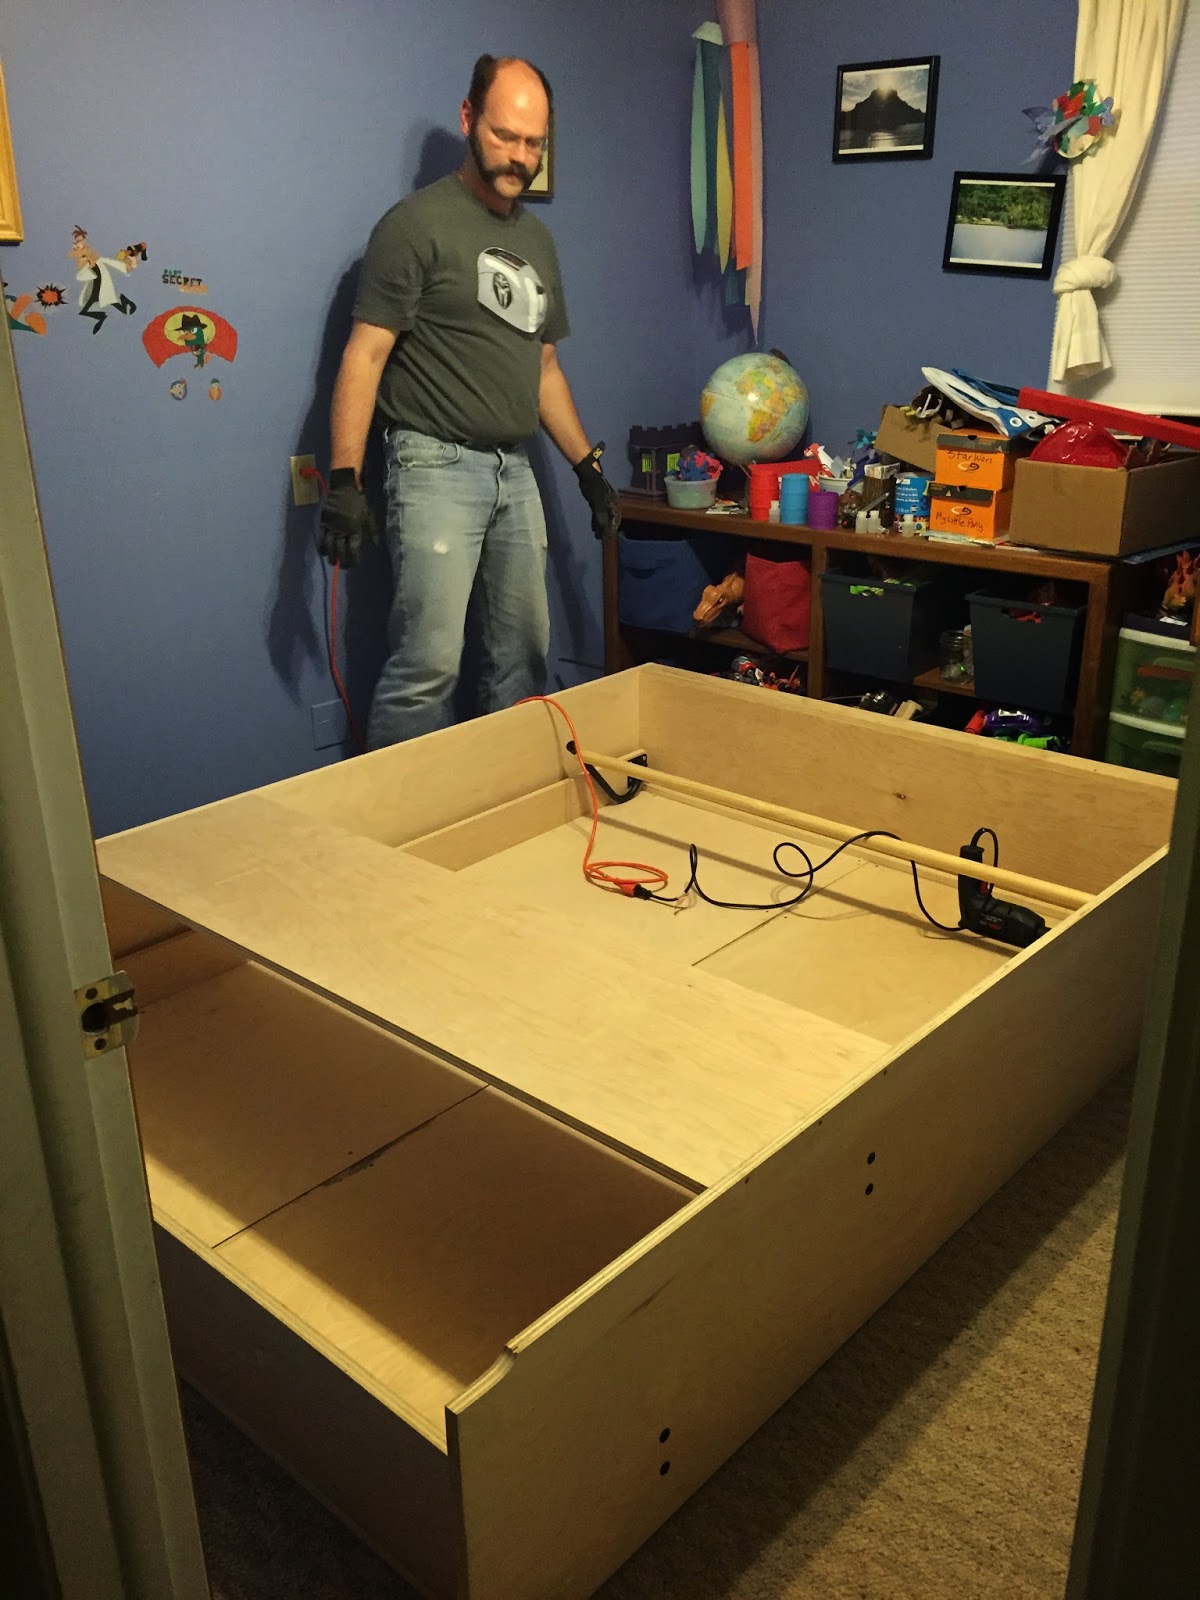 Chris standing next to the Murphy bed and frame while assembling it in the playroom guest room.